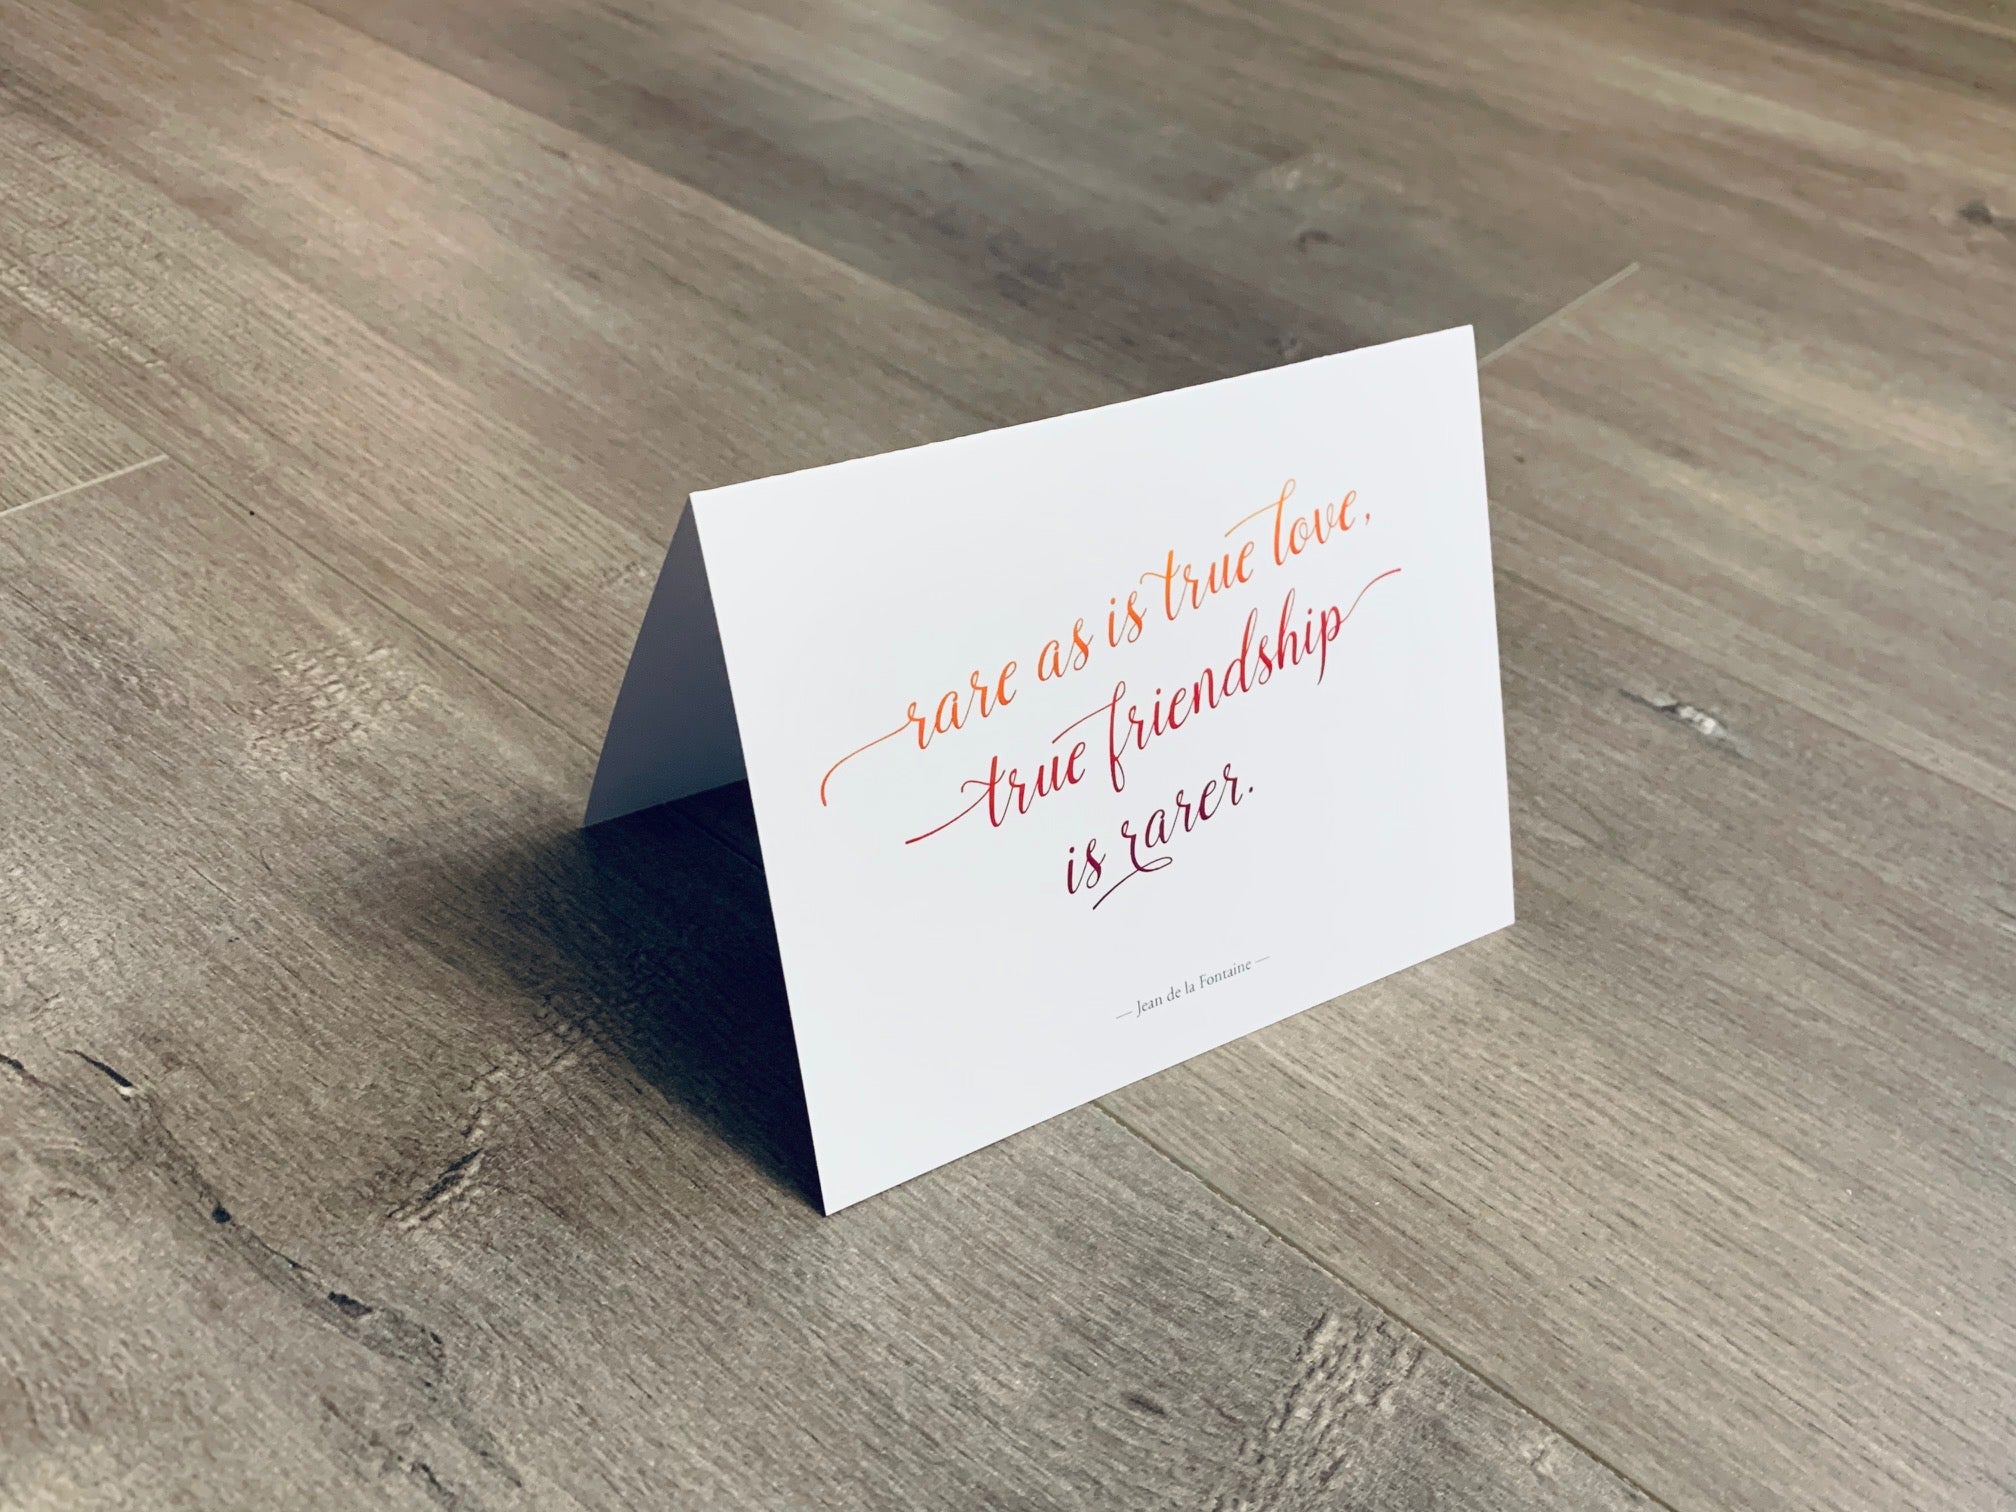 A white, folded notecard sits on a wooden floor. The card has a quote by Jean de la Fontaine and says, "rare as is true love. true friendship is rarer." The Friendship Valentines collection by Stationare.